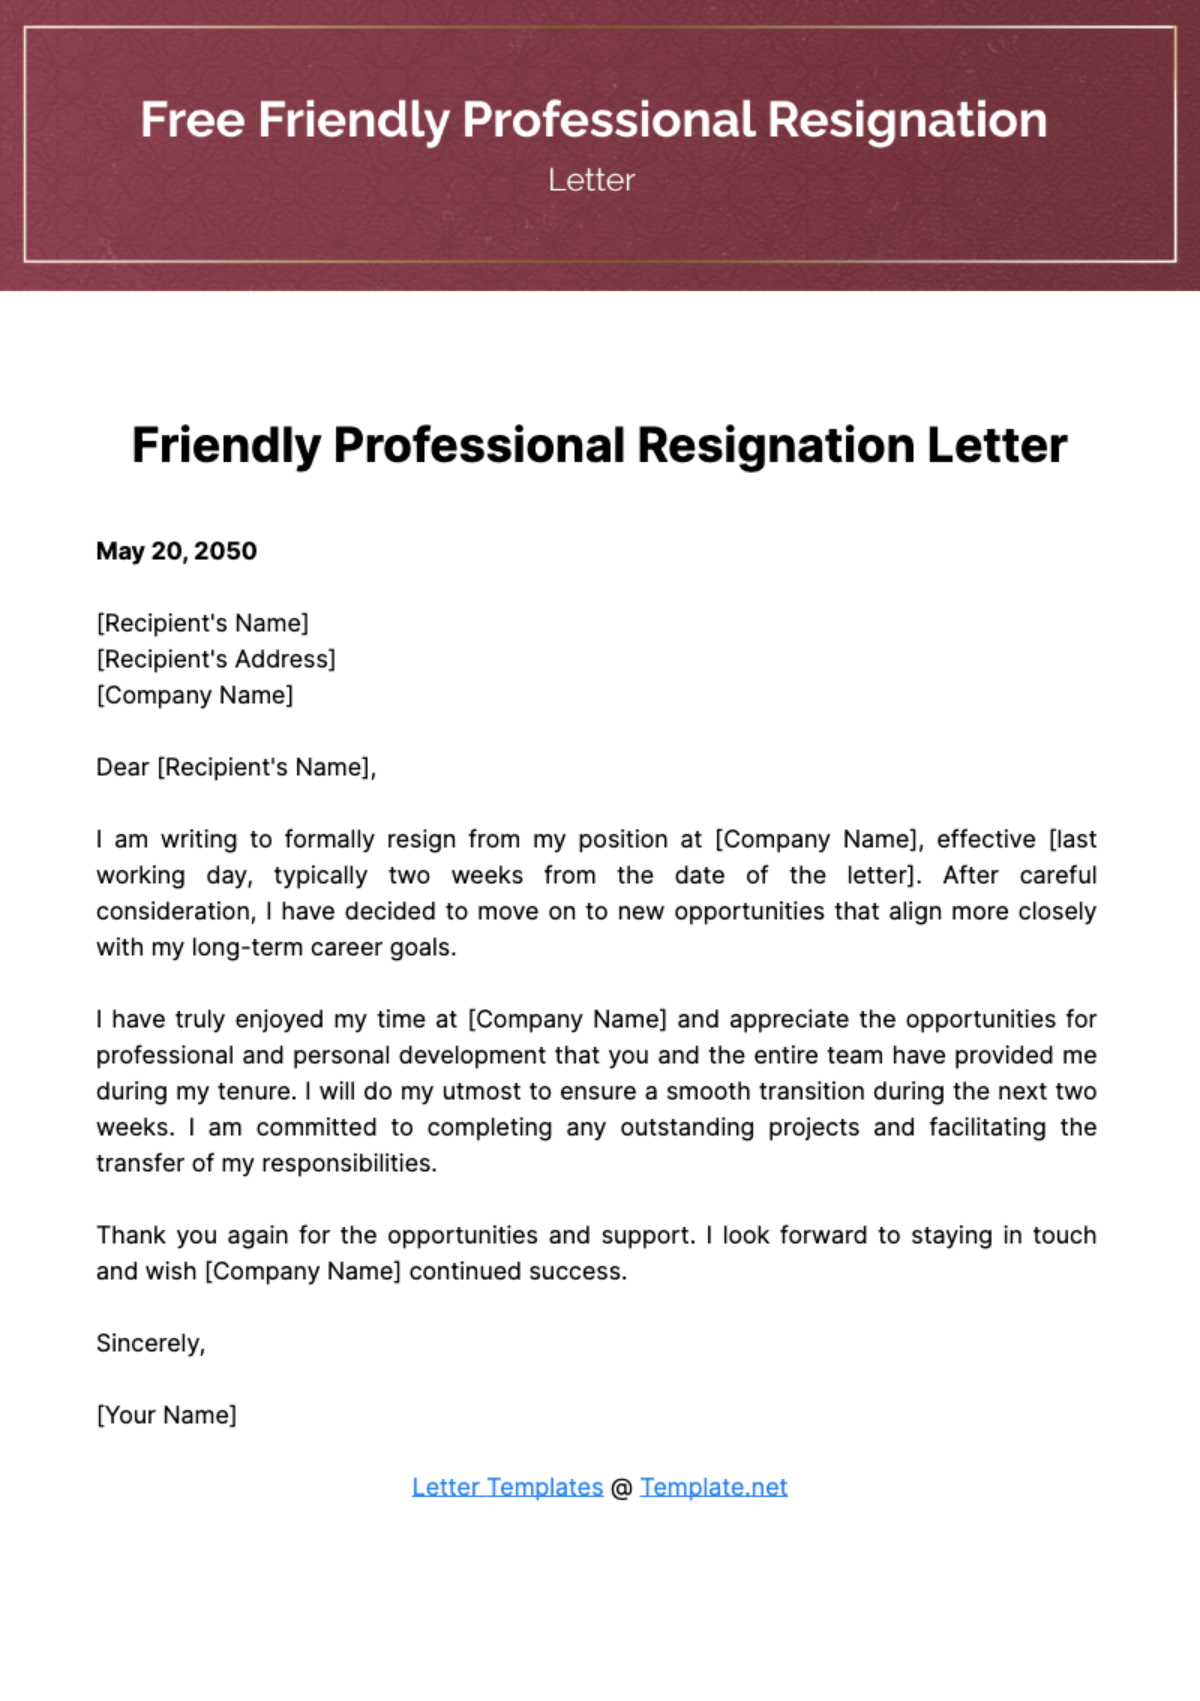 Free Friendly Professional Resignation Letter Template